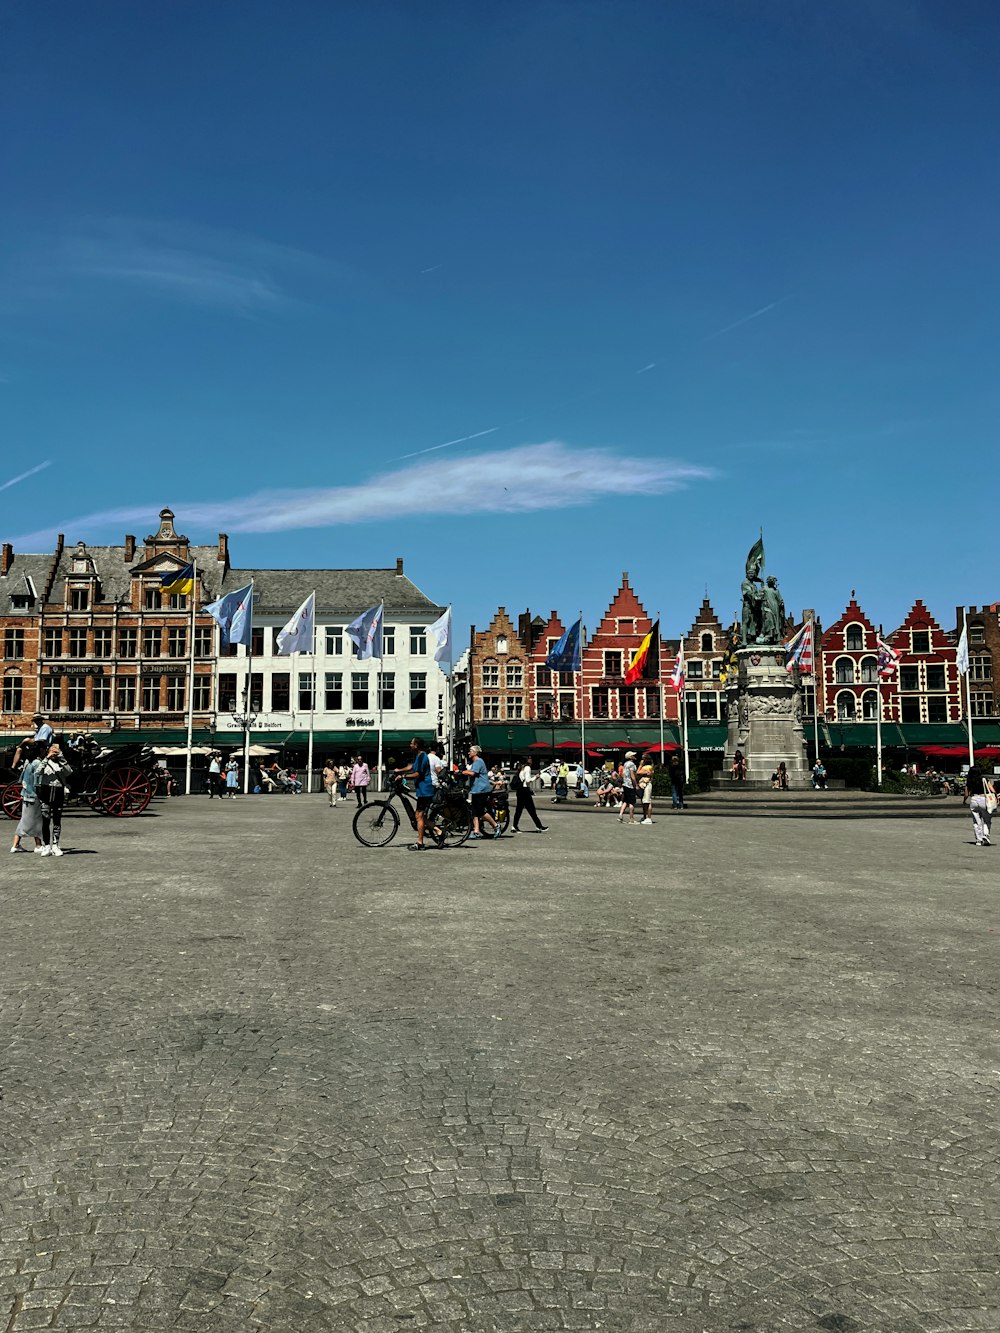 a group of people riding bikes in a town square